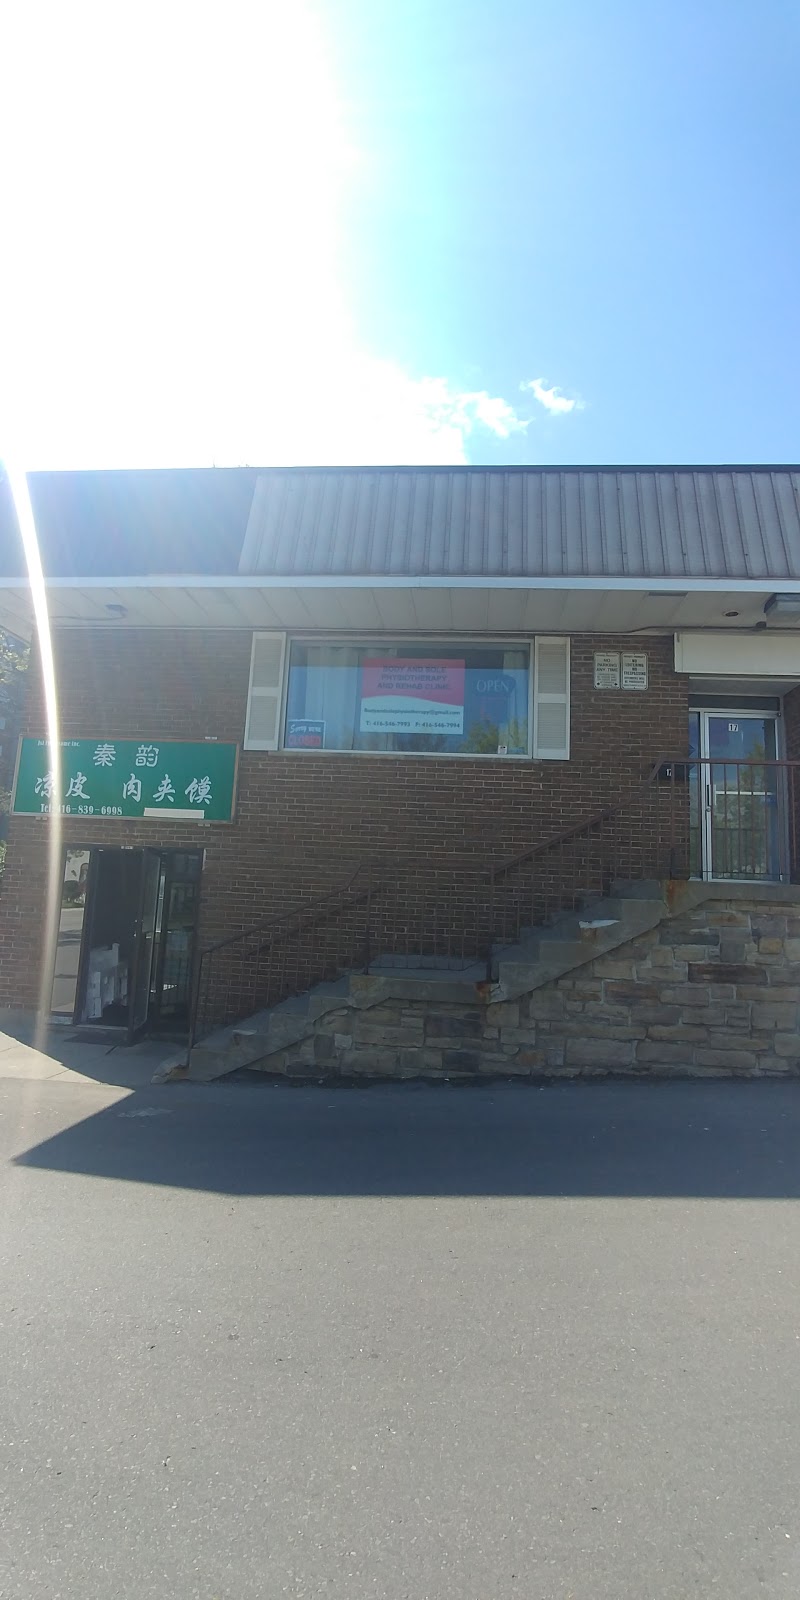 Body and Sole Physiotherapy and Rehab Clinic | 17 Bonis Ave, Scarborough, ON M1T 2T9, Canada | Phone: (416) 546-7993